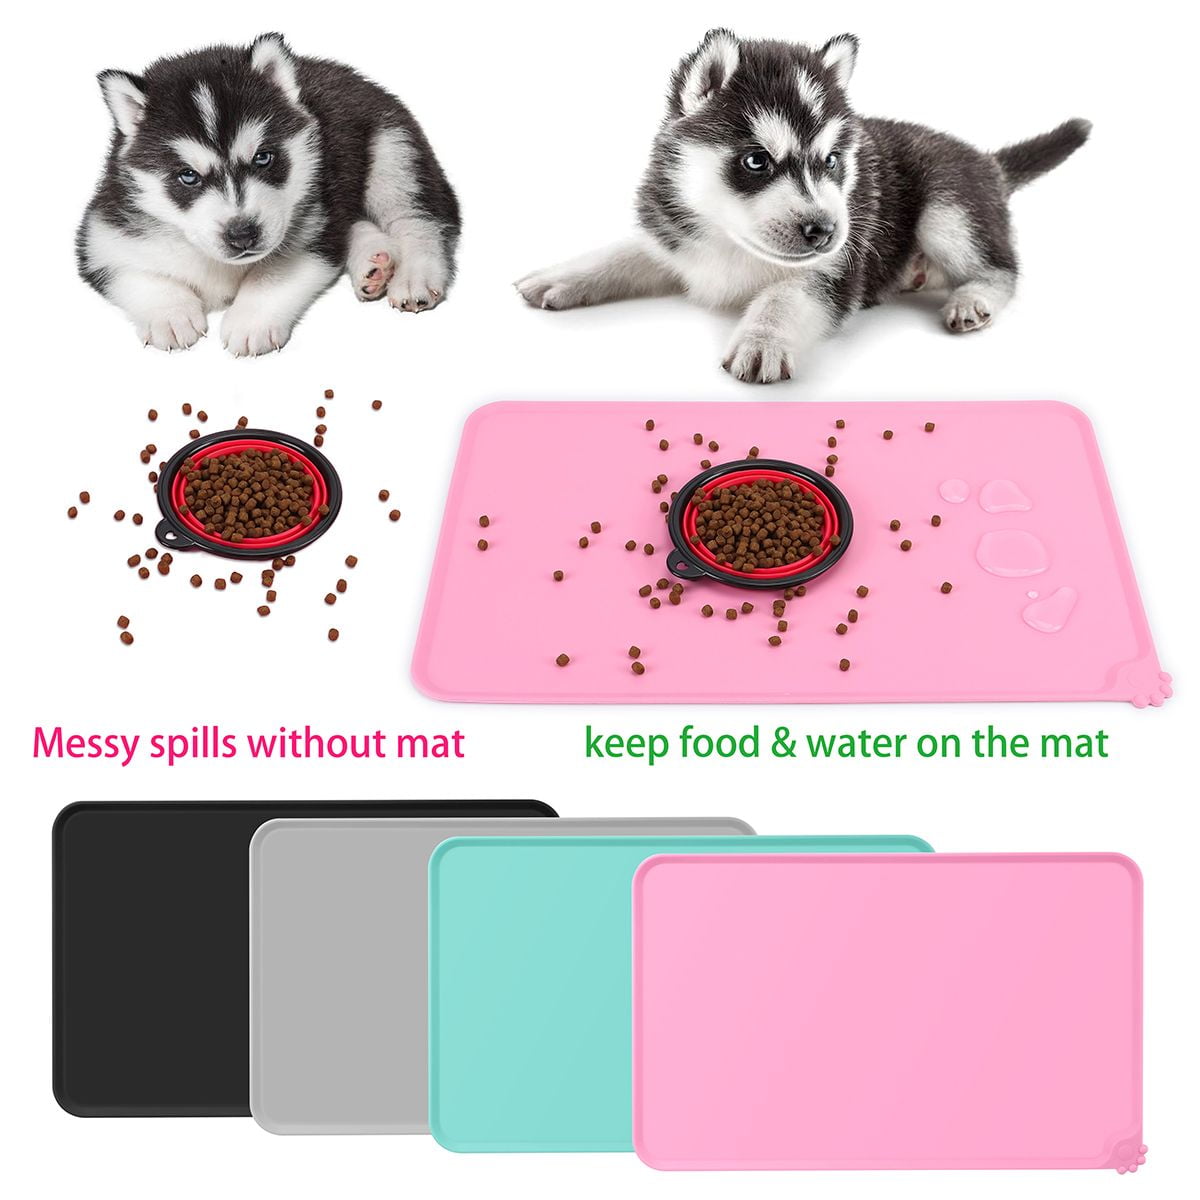 Averyday 32x24 Silicone Dog Water Bowl Mat Fits Multi Cat Feeding Stations, 0.63 inch High Edge XL Waterproof Rubber Pet Dog Cat Food Bowl Mat/Tray